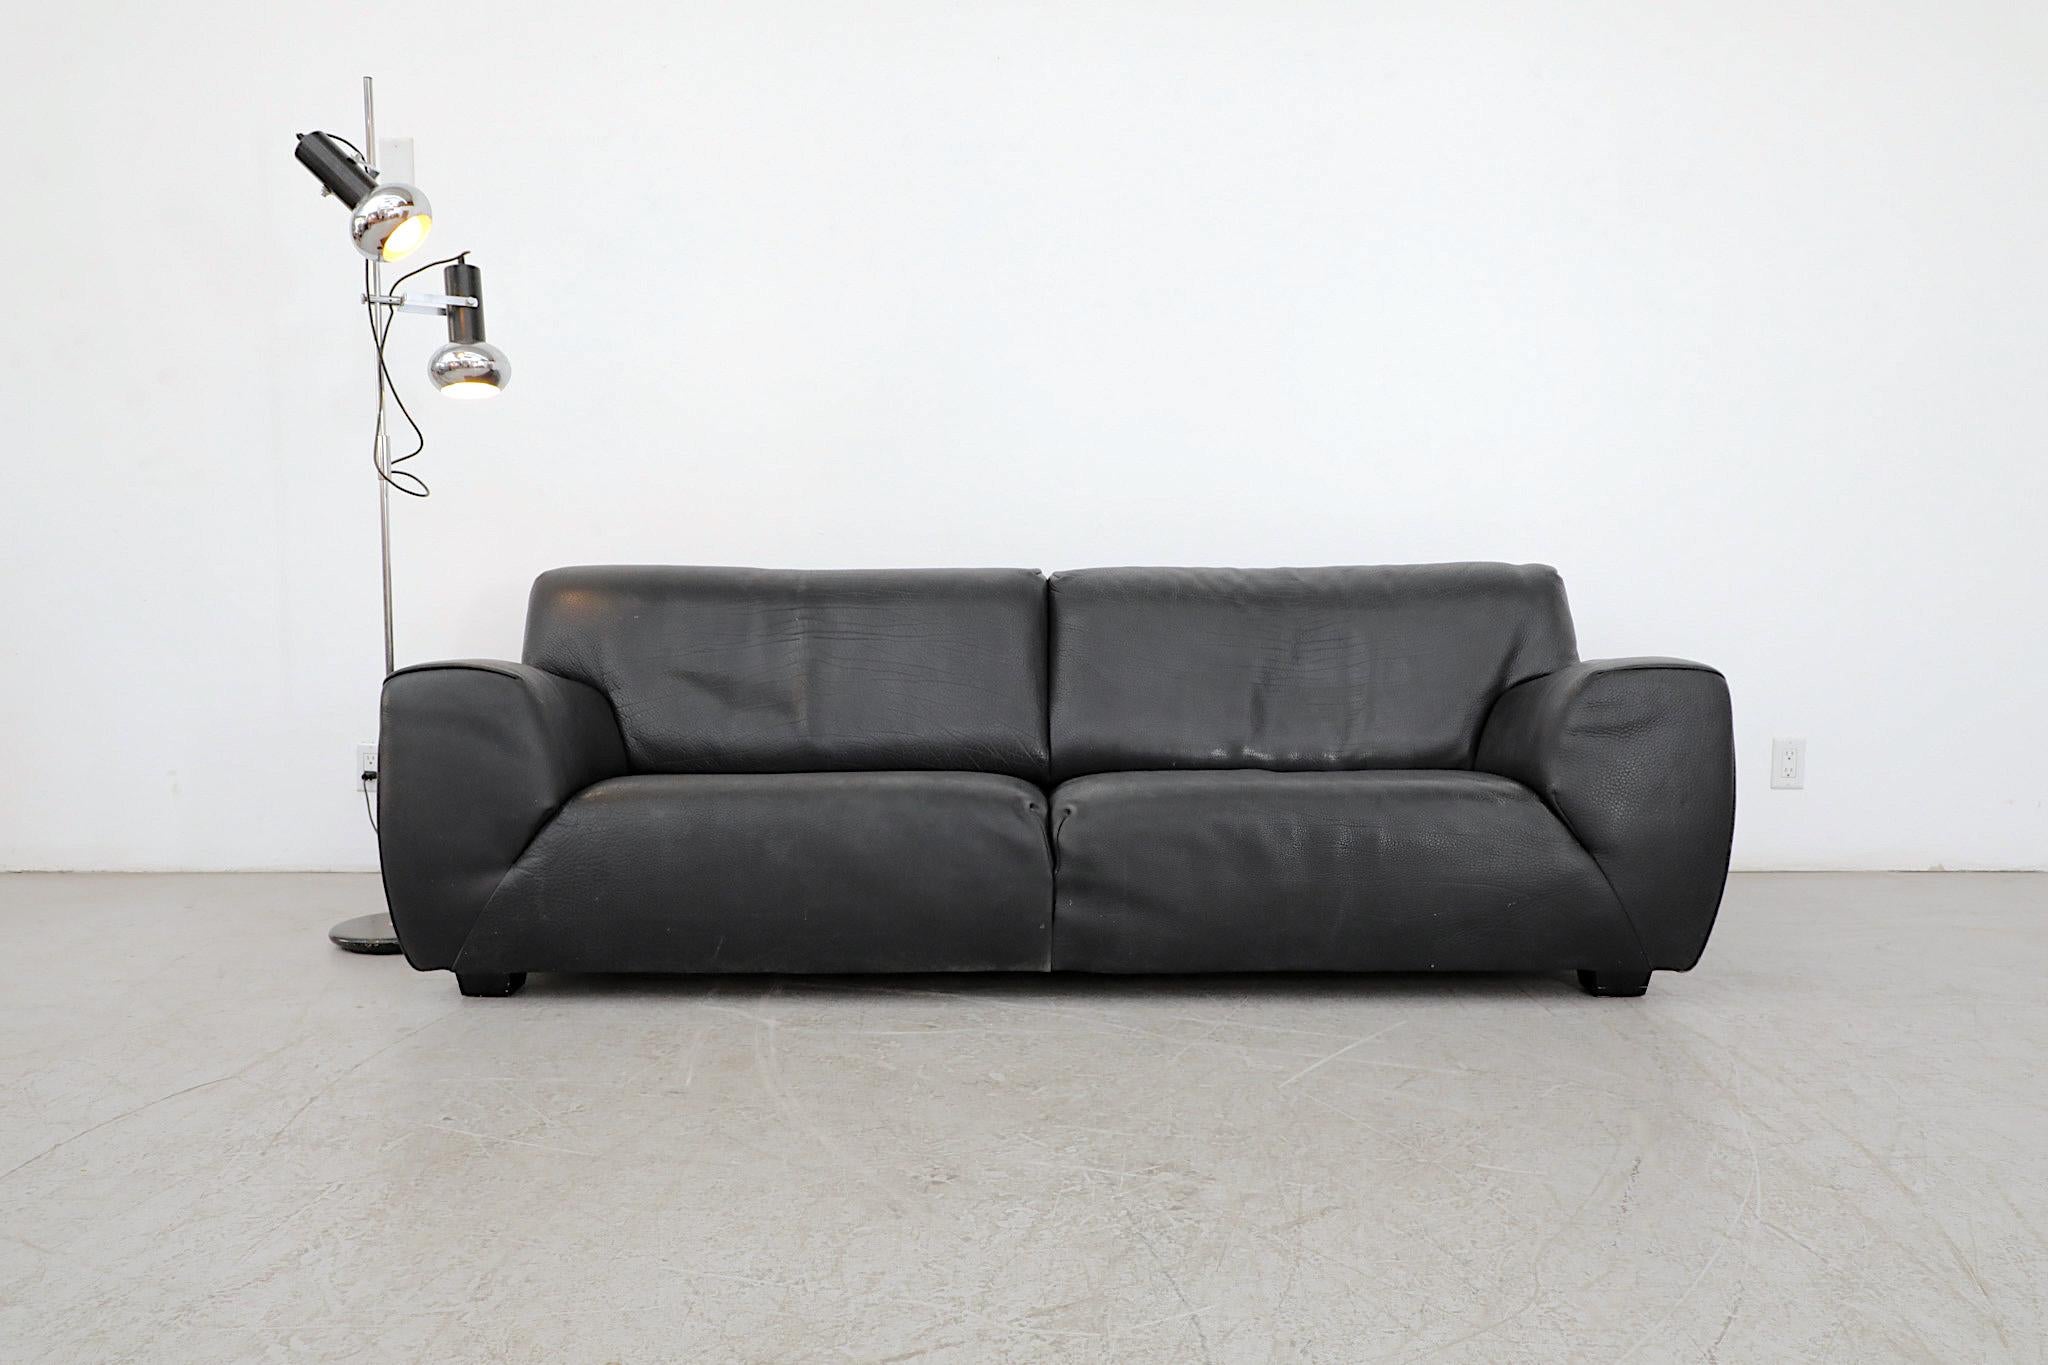 Beautiful, Mid-Century, thick black leather sofa by Italian acclaimed manufacturer Molinari. The family owned company has been in business since 1960 and is highly regarded for their well designed and expertly crafted pieces. This comfy and well